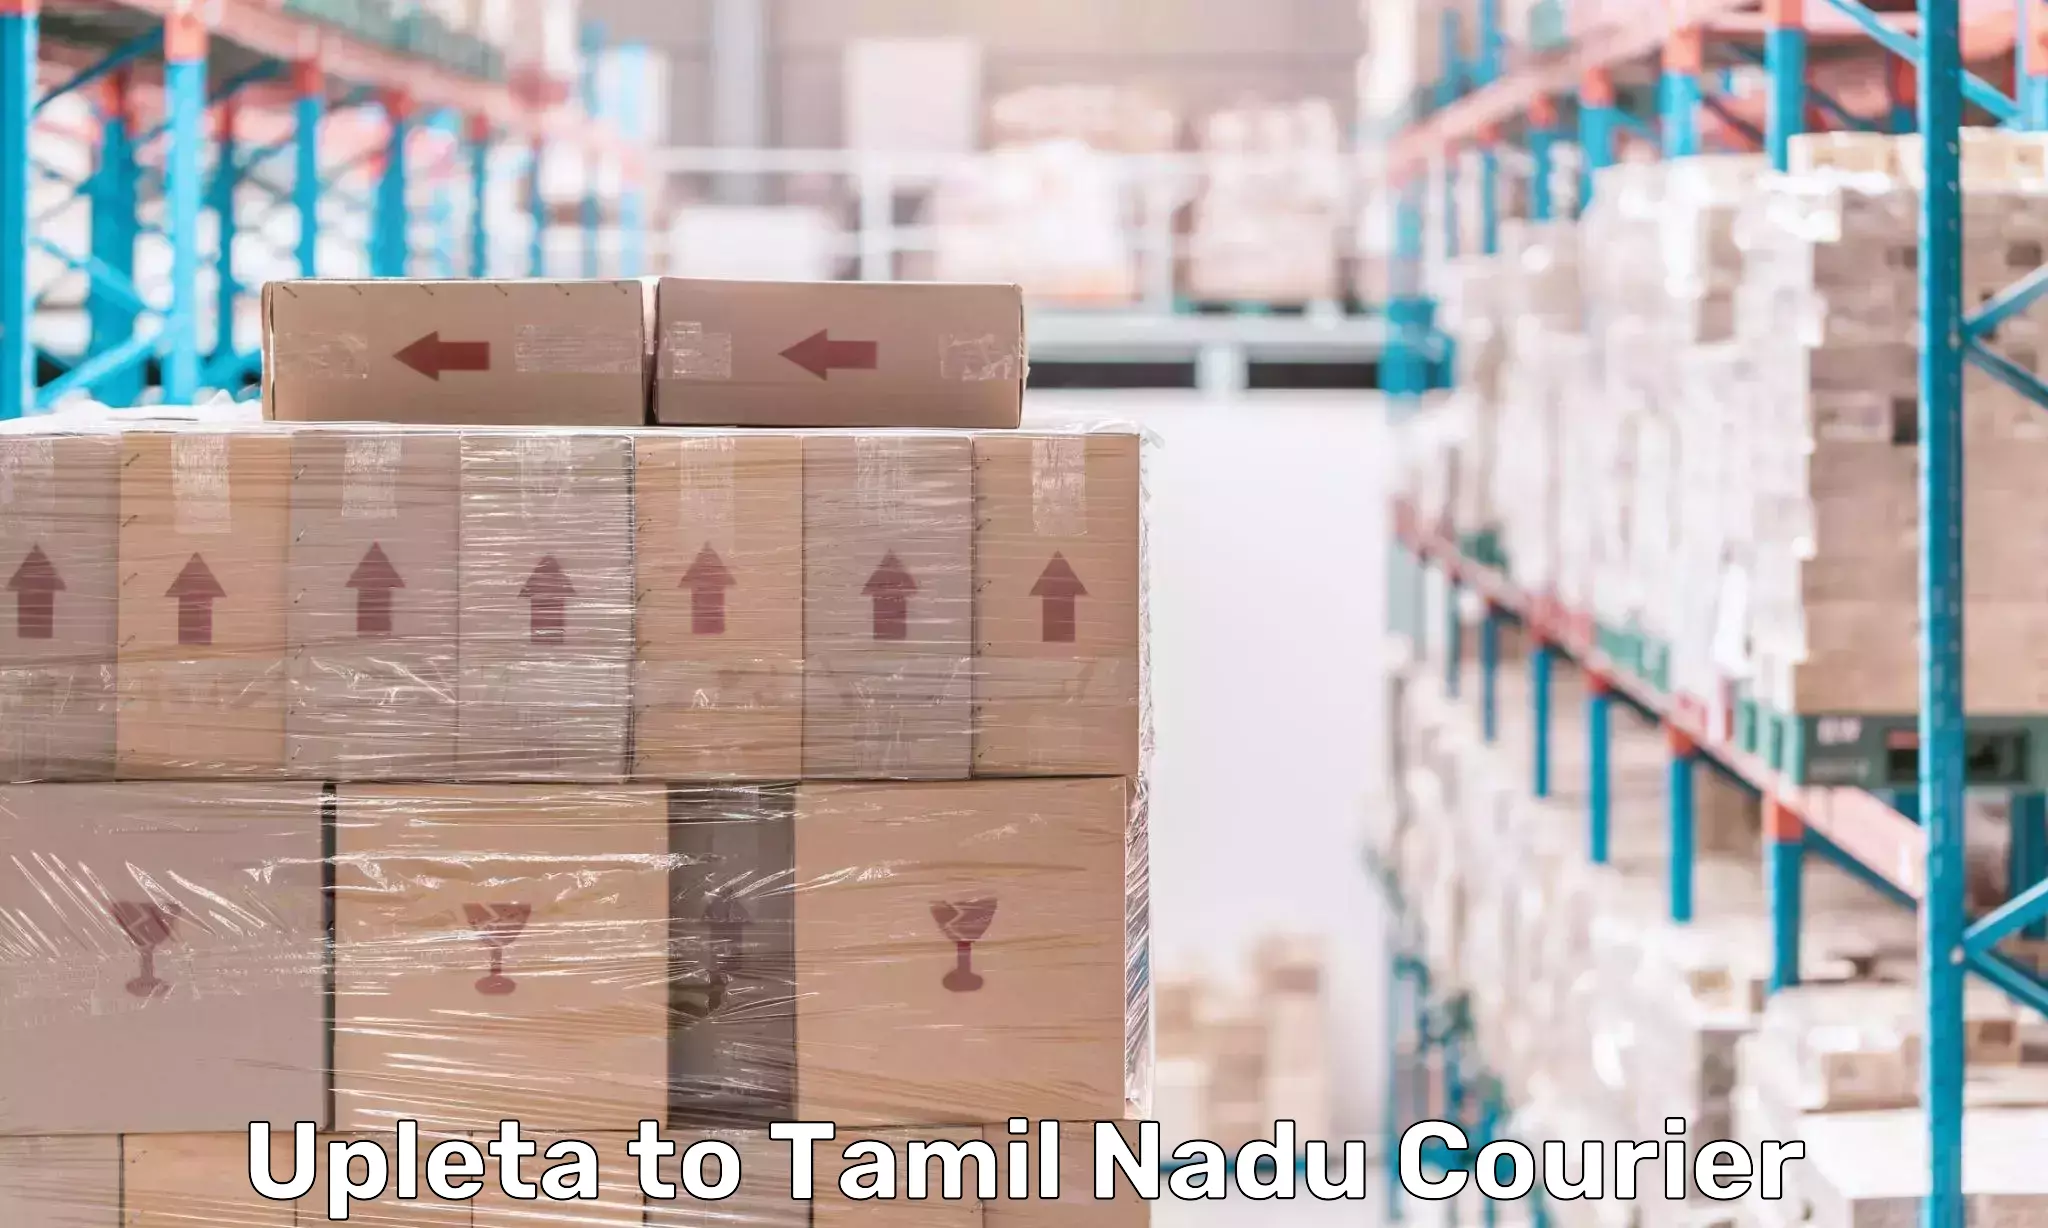 Courier service booking Upleta to Tamil Nadu